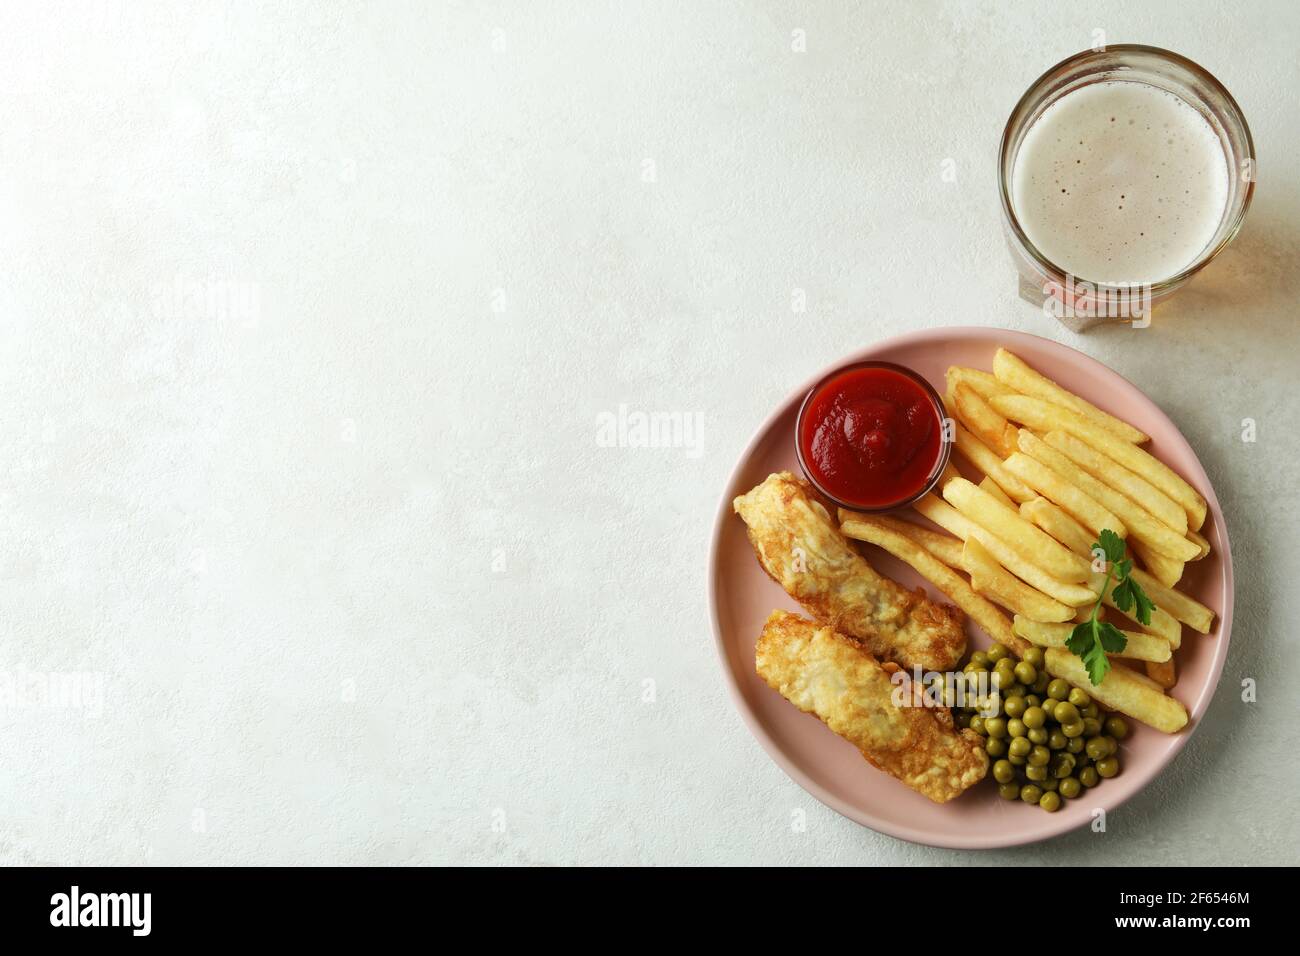 Plate with fried fish and chips, and beer on white textured table Stock Photo